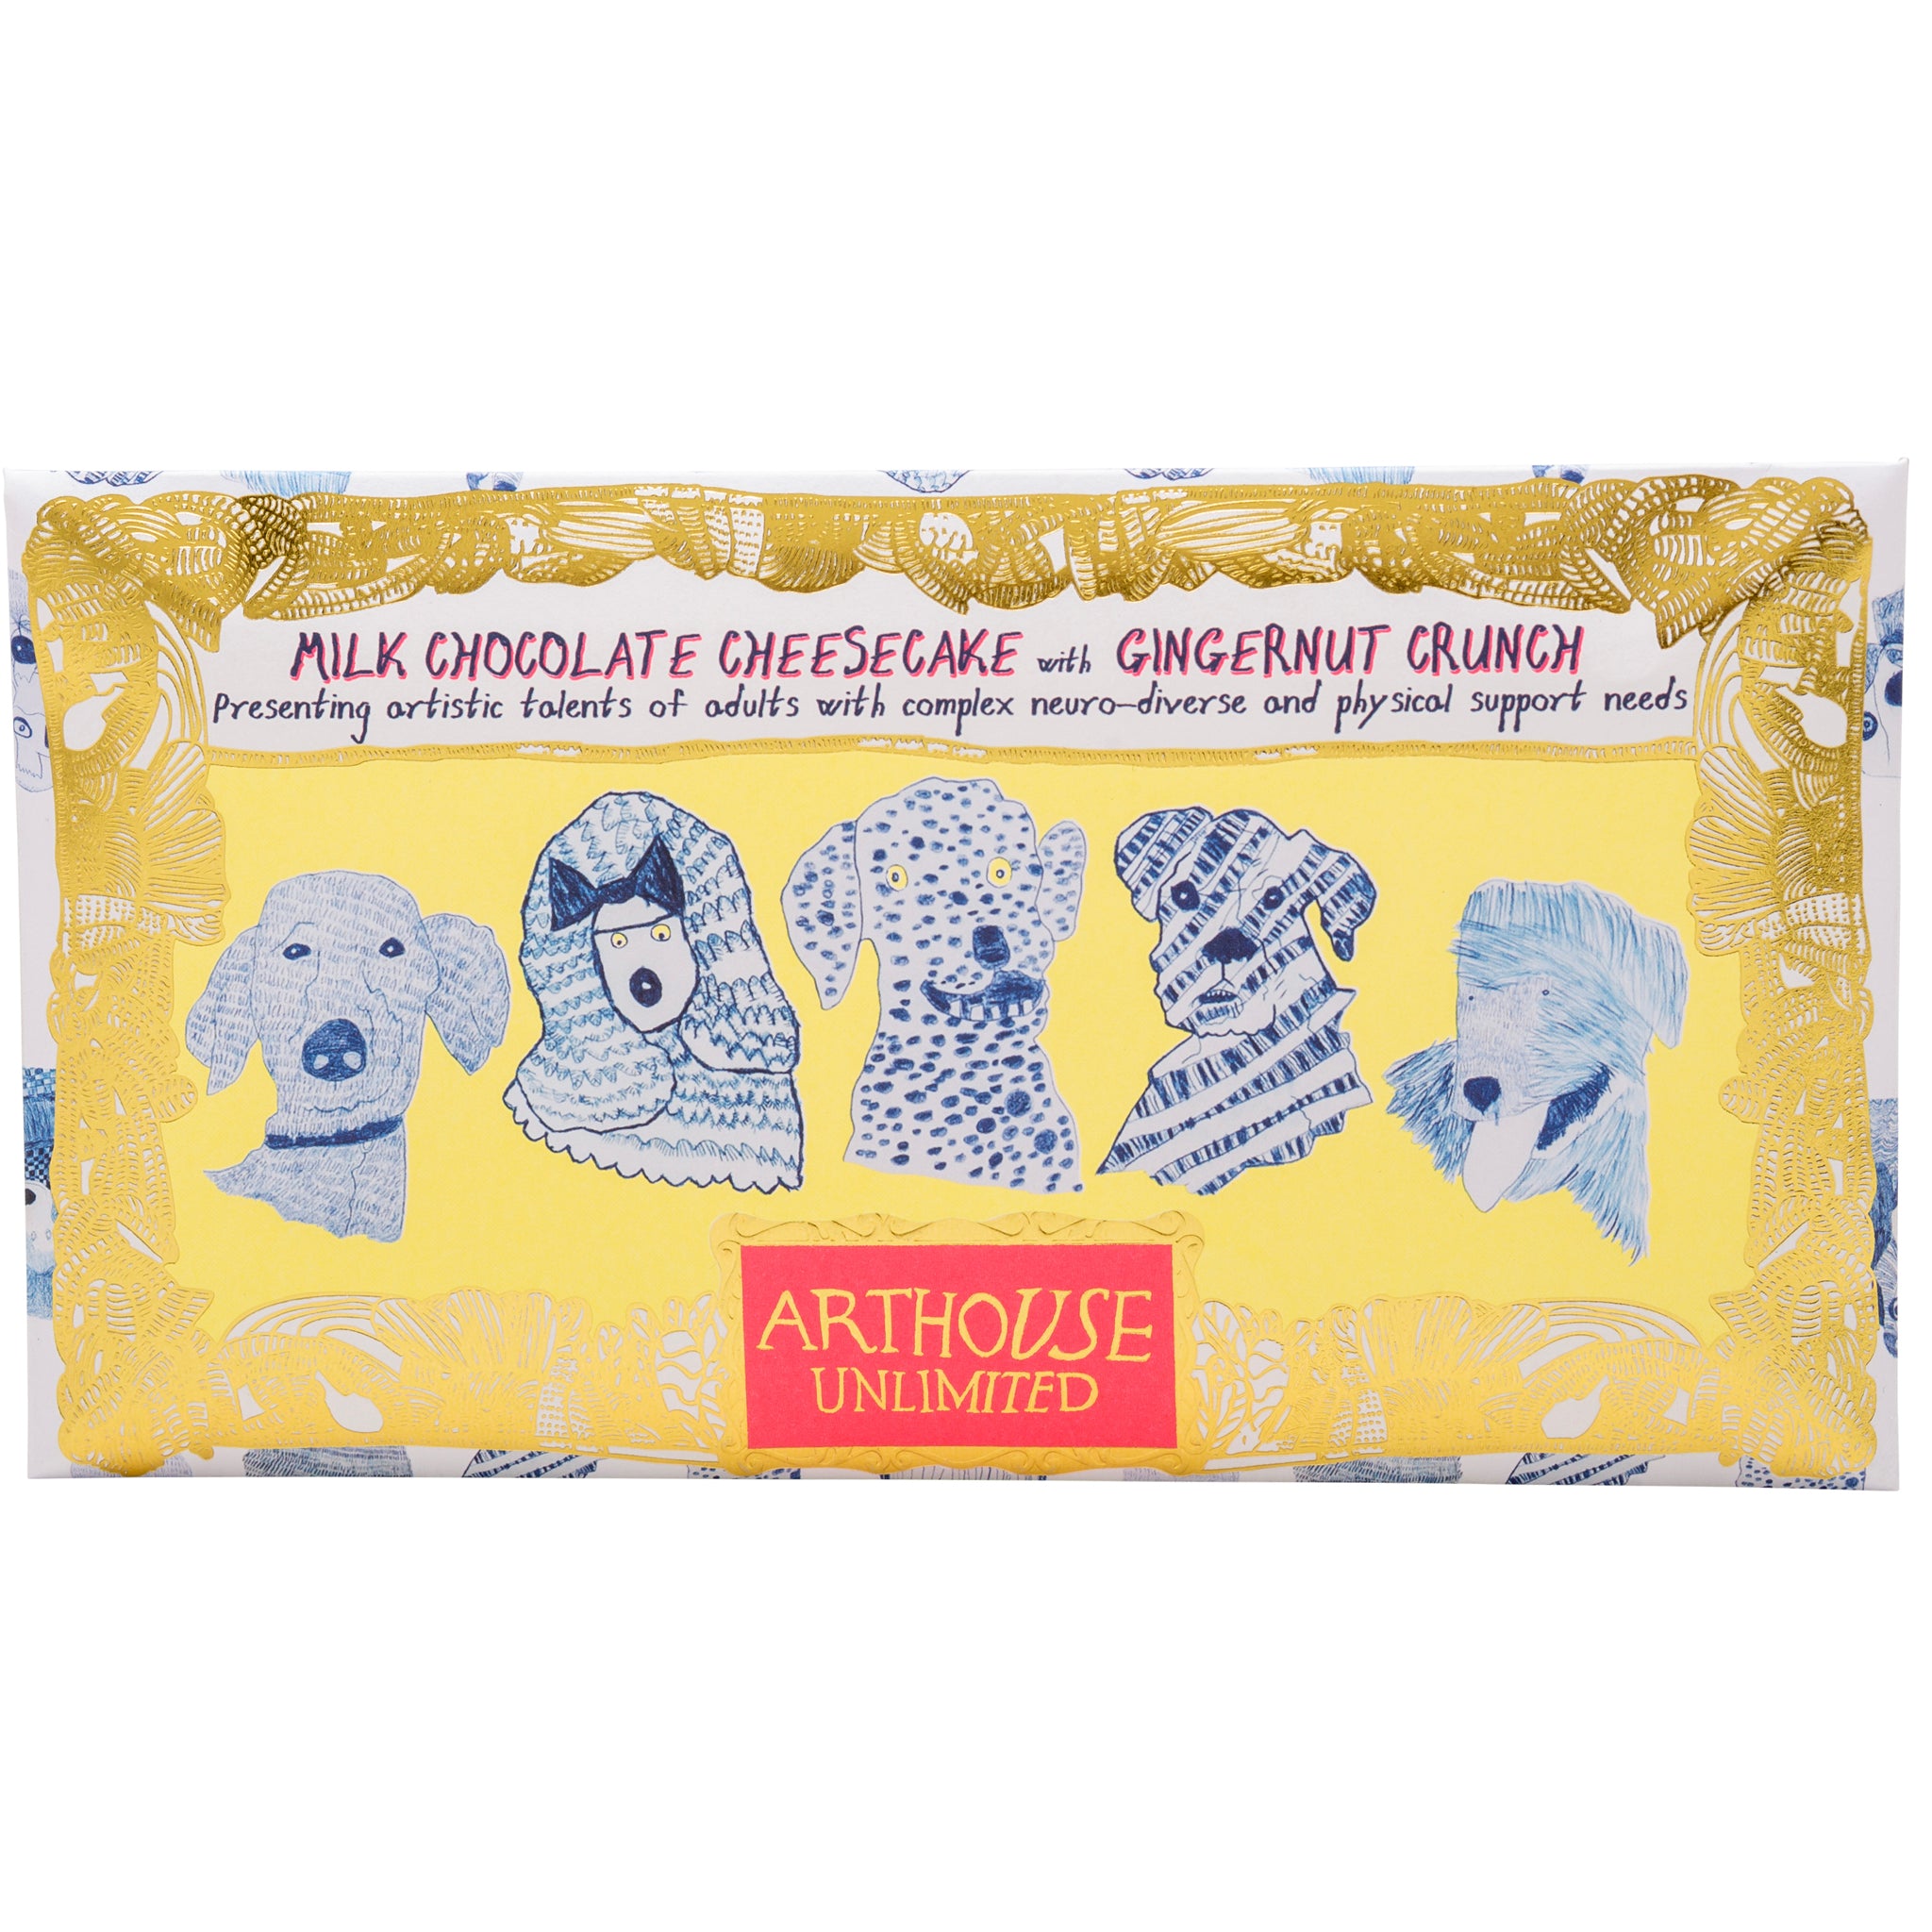 Blue Dogs, Milk Chocolate Bar Cheesecake with Gingernut Crunch, blue and yellow packaging